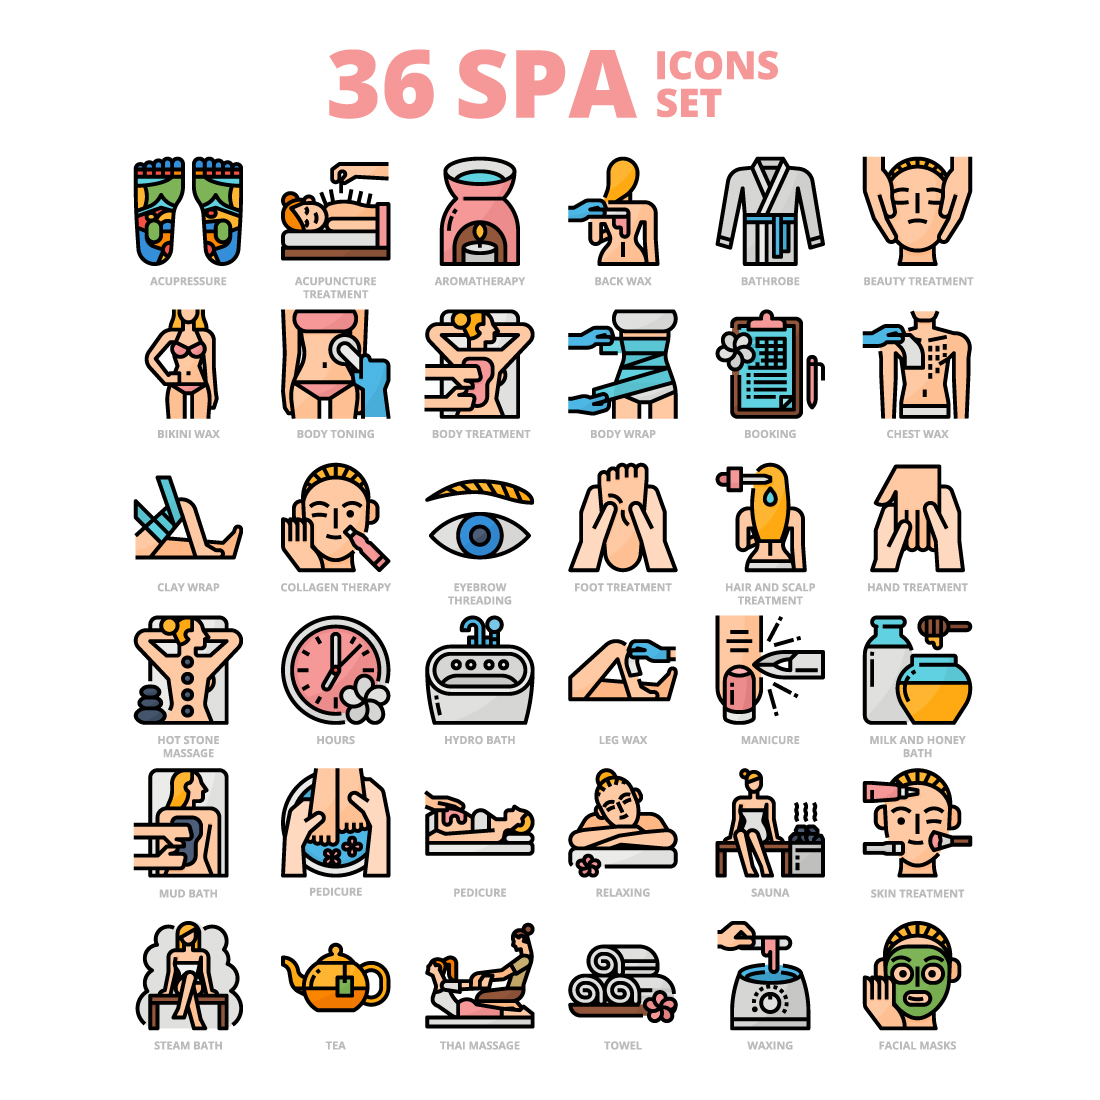 36 Spa Icons Set x 4 Styles cover image.